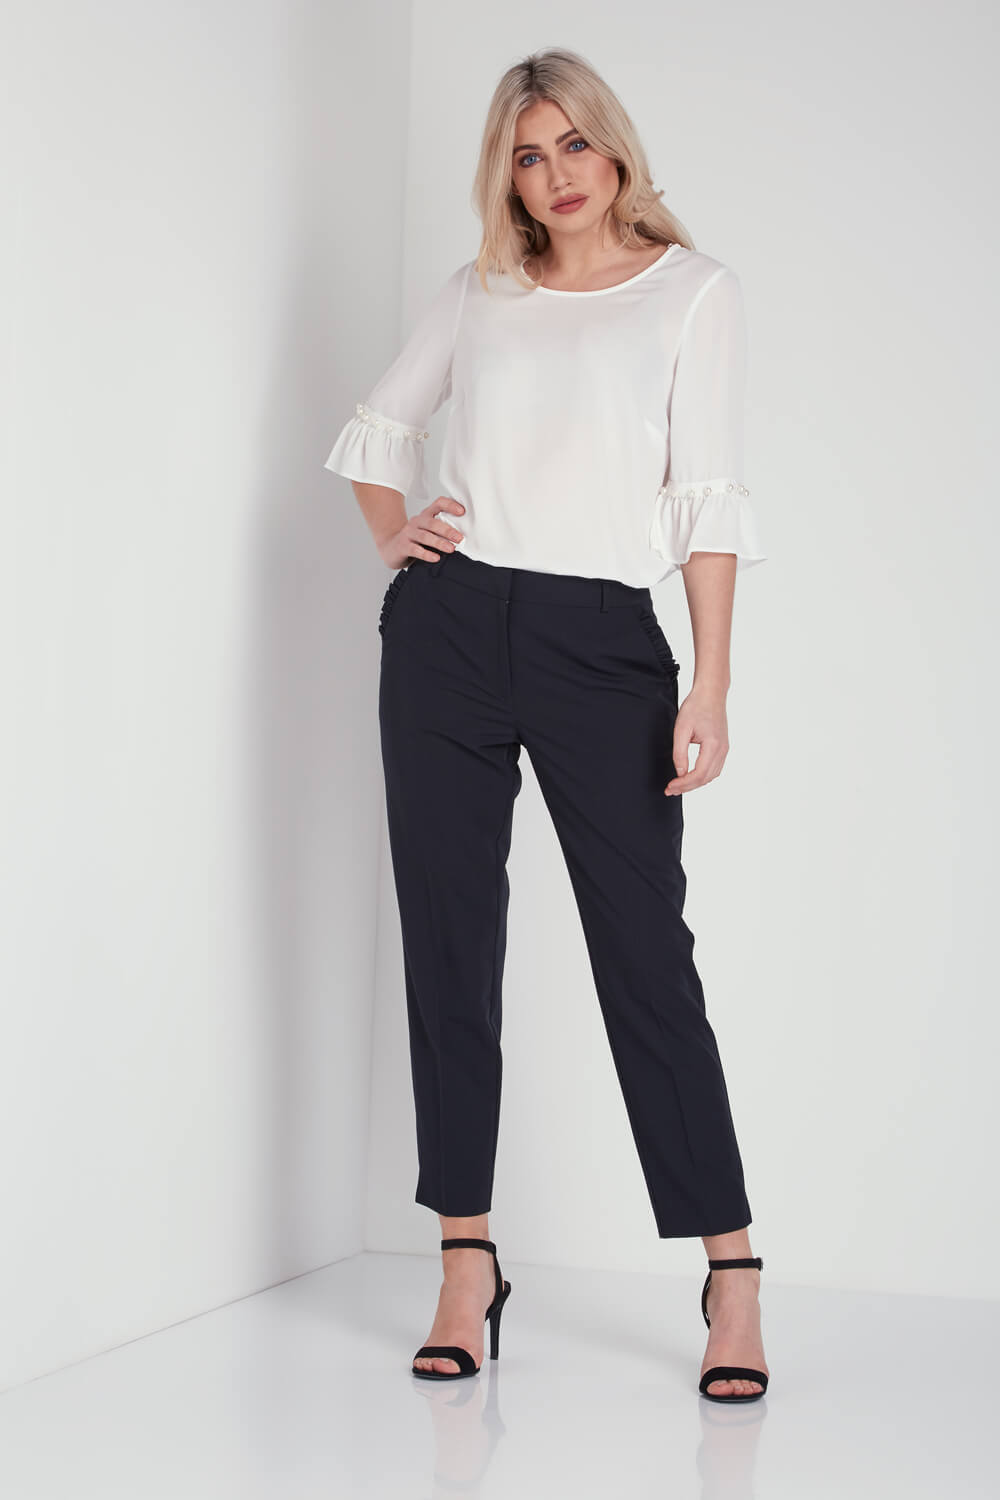 Black Tapered Frill Detail Trousers, Image 3 of 5